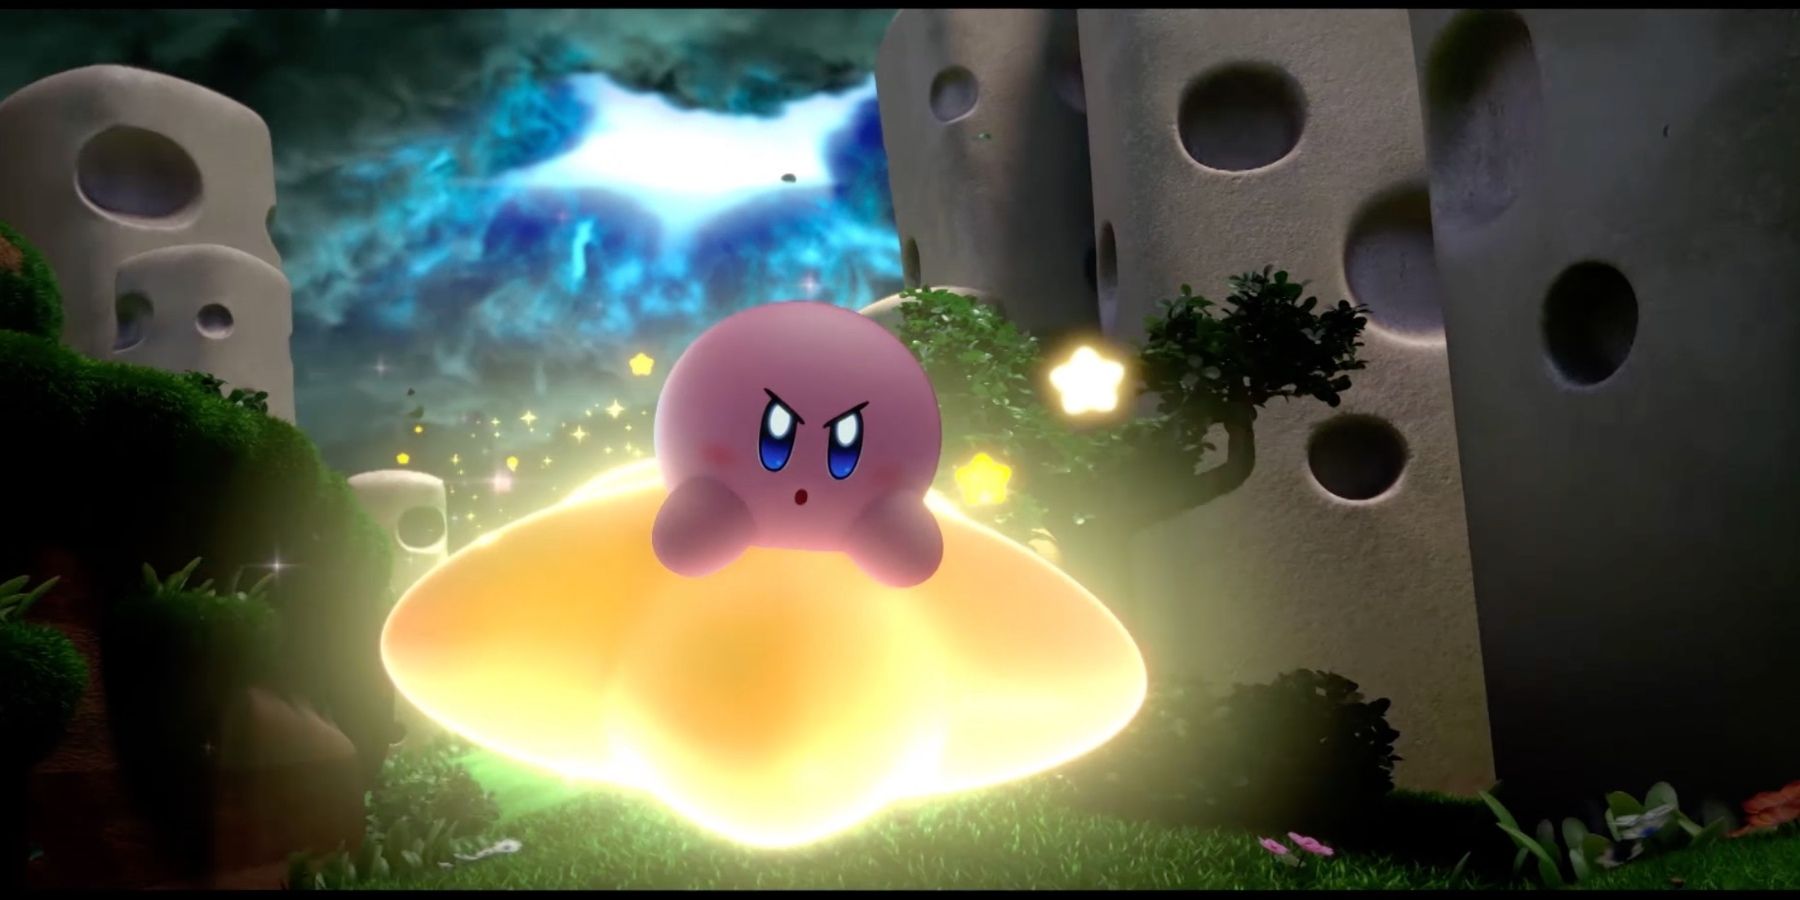 Kirby And The Forgotten Land Launches March 25th 2022 For